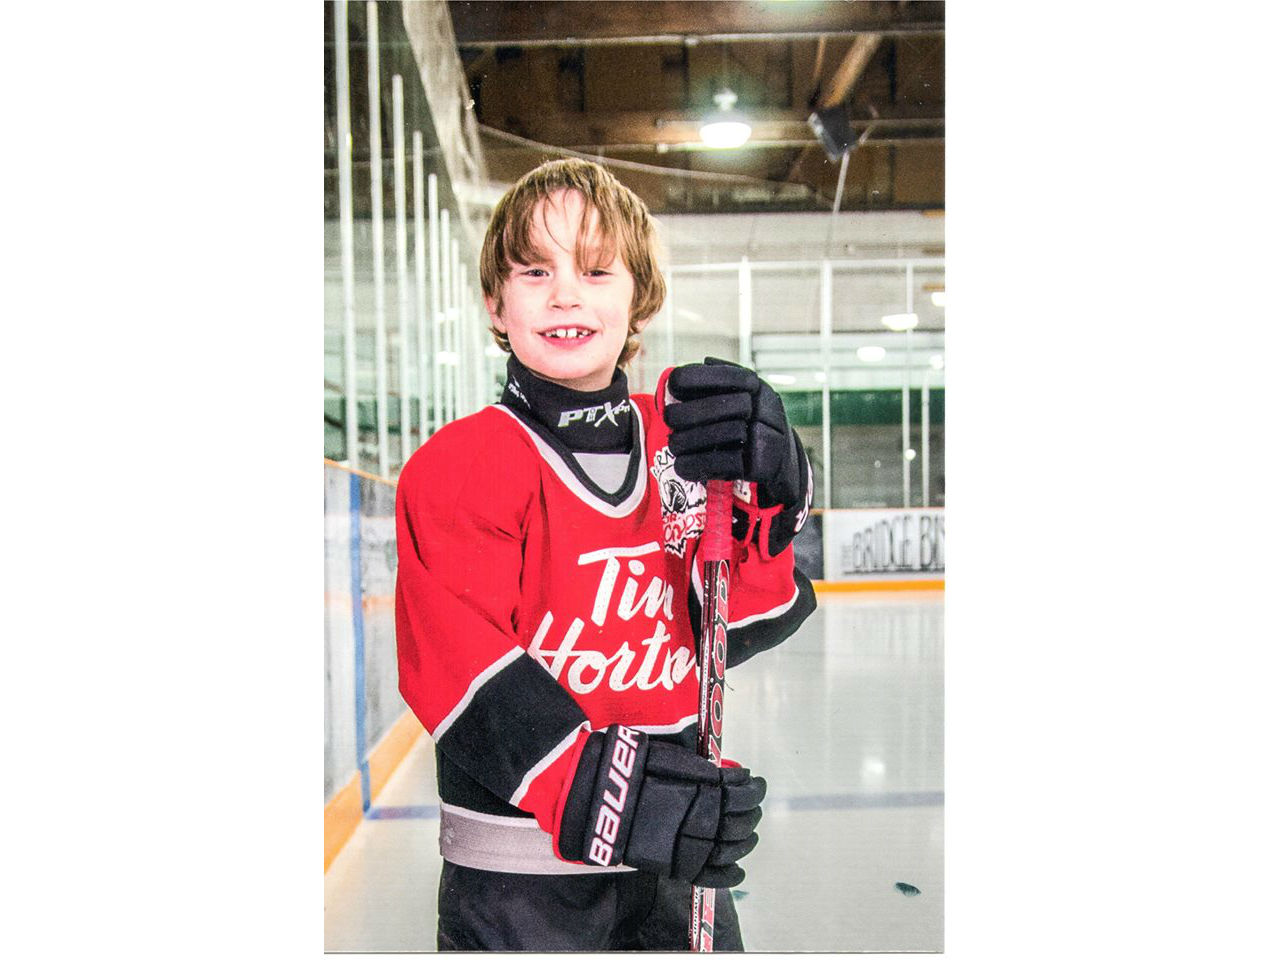 Ollie in a Tim Horton's hockey jersey on the ice